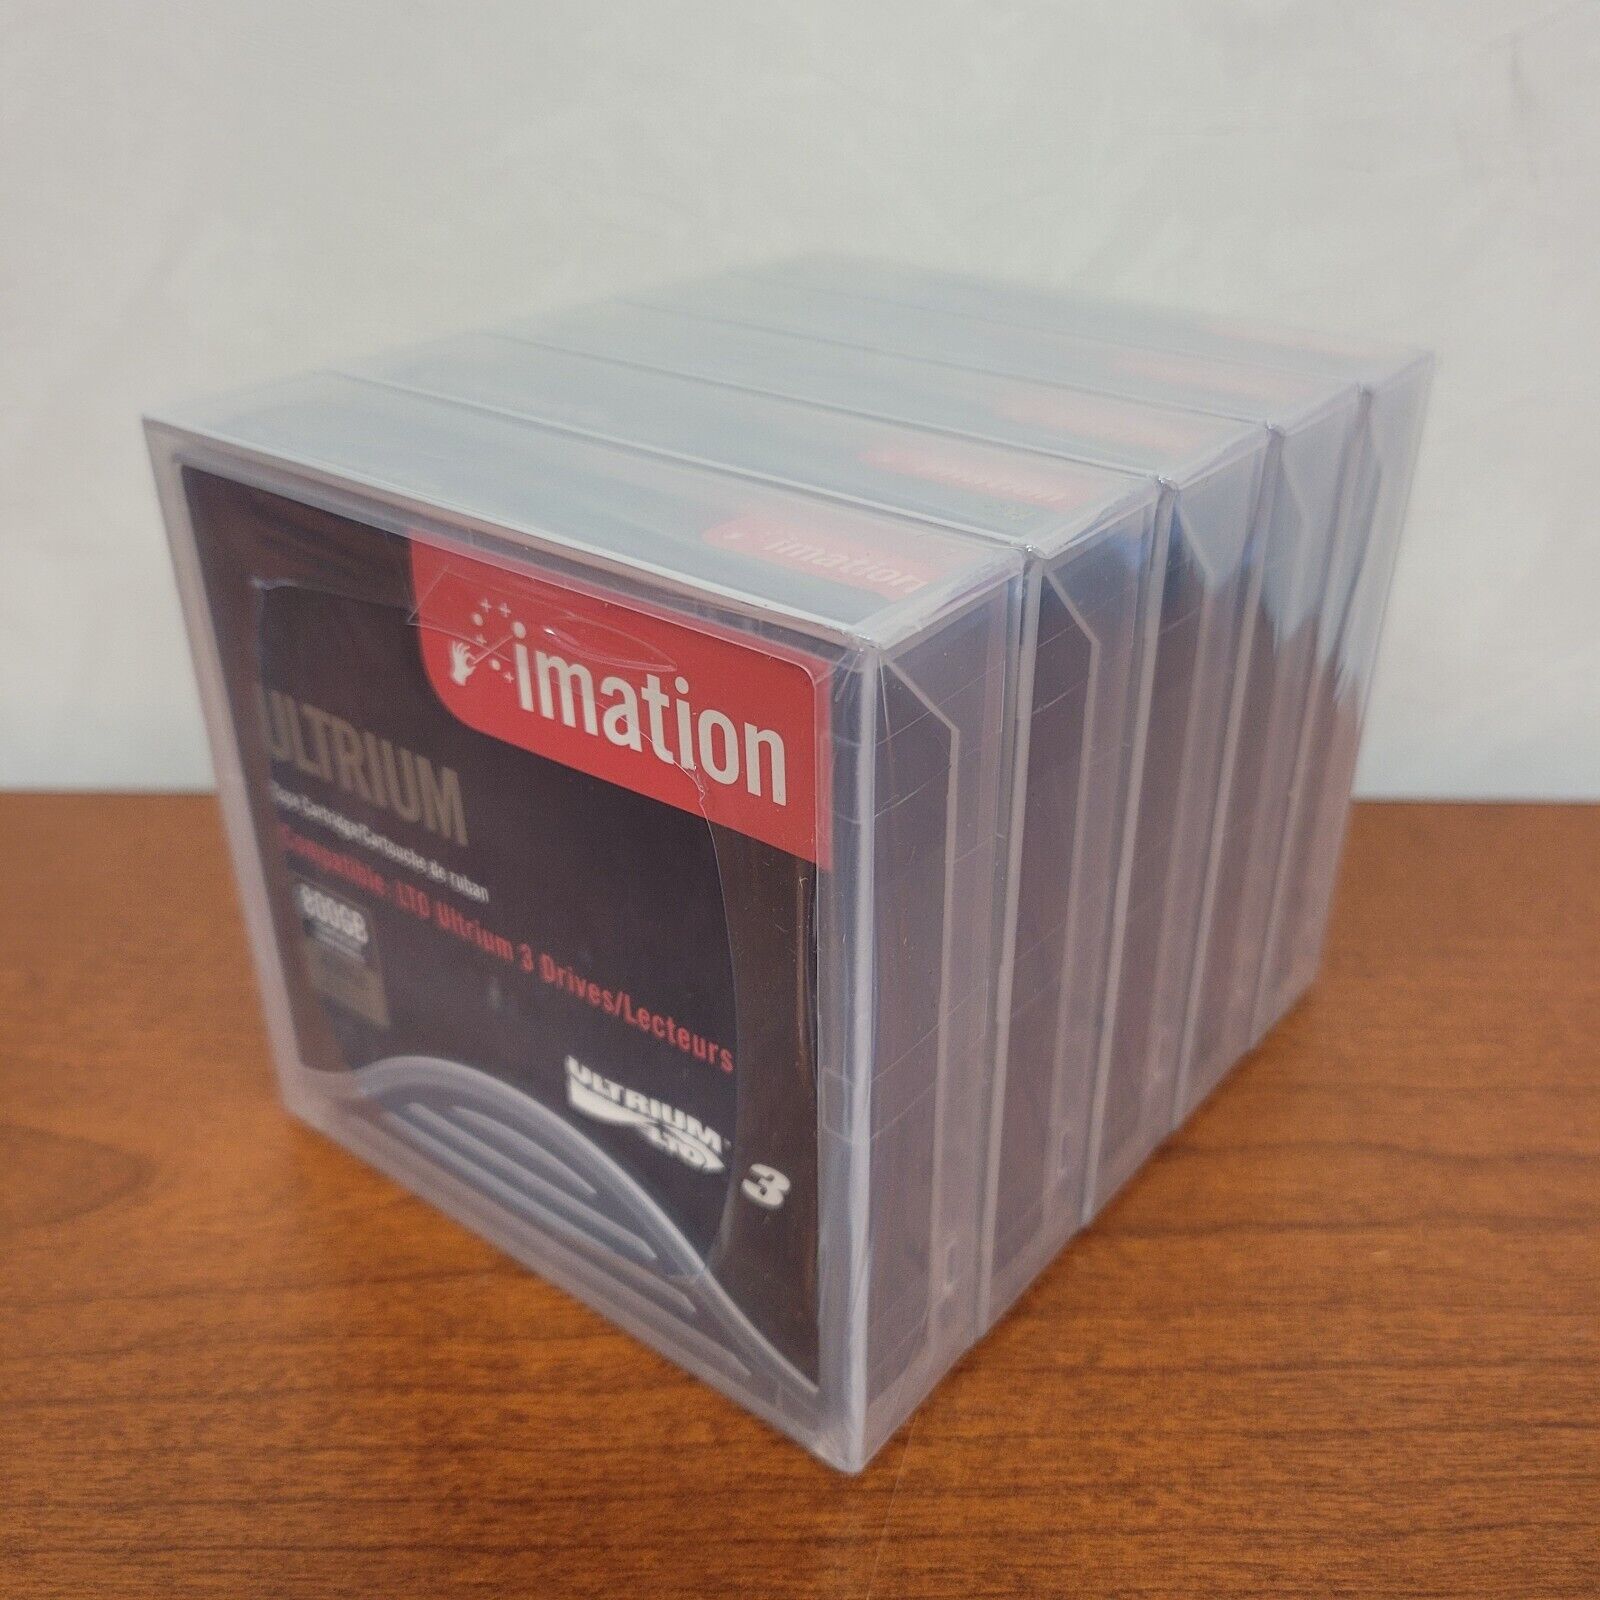 Pack Of 5 Imation Ultrium LTO-3 Tape Cartridges (IMN17532) ~New Factory Sealed